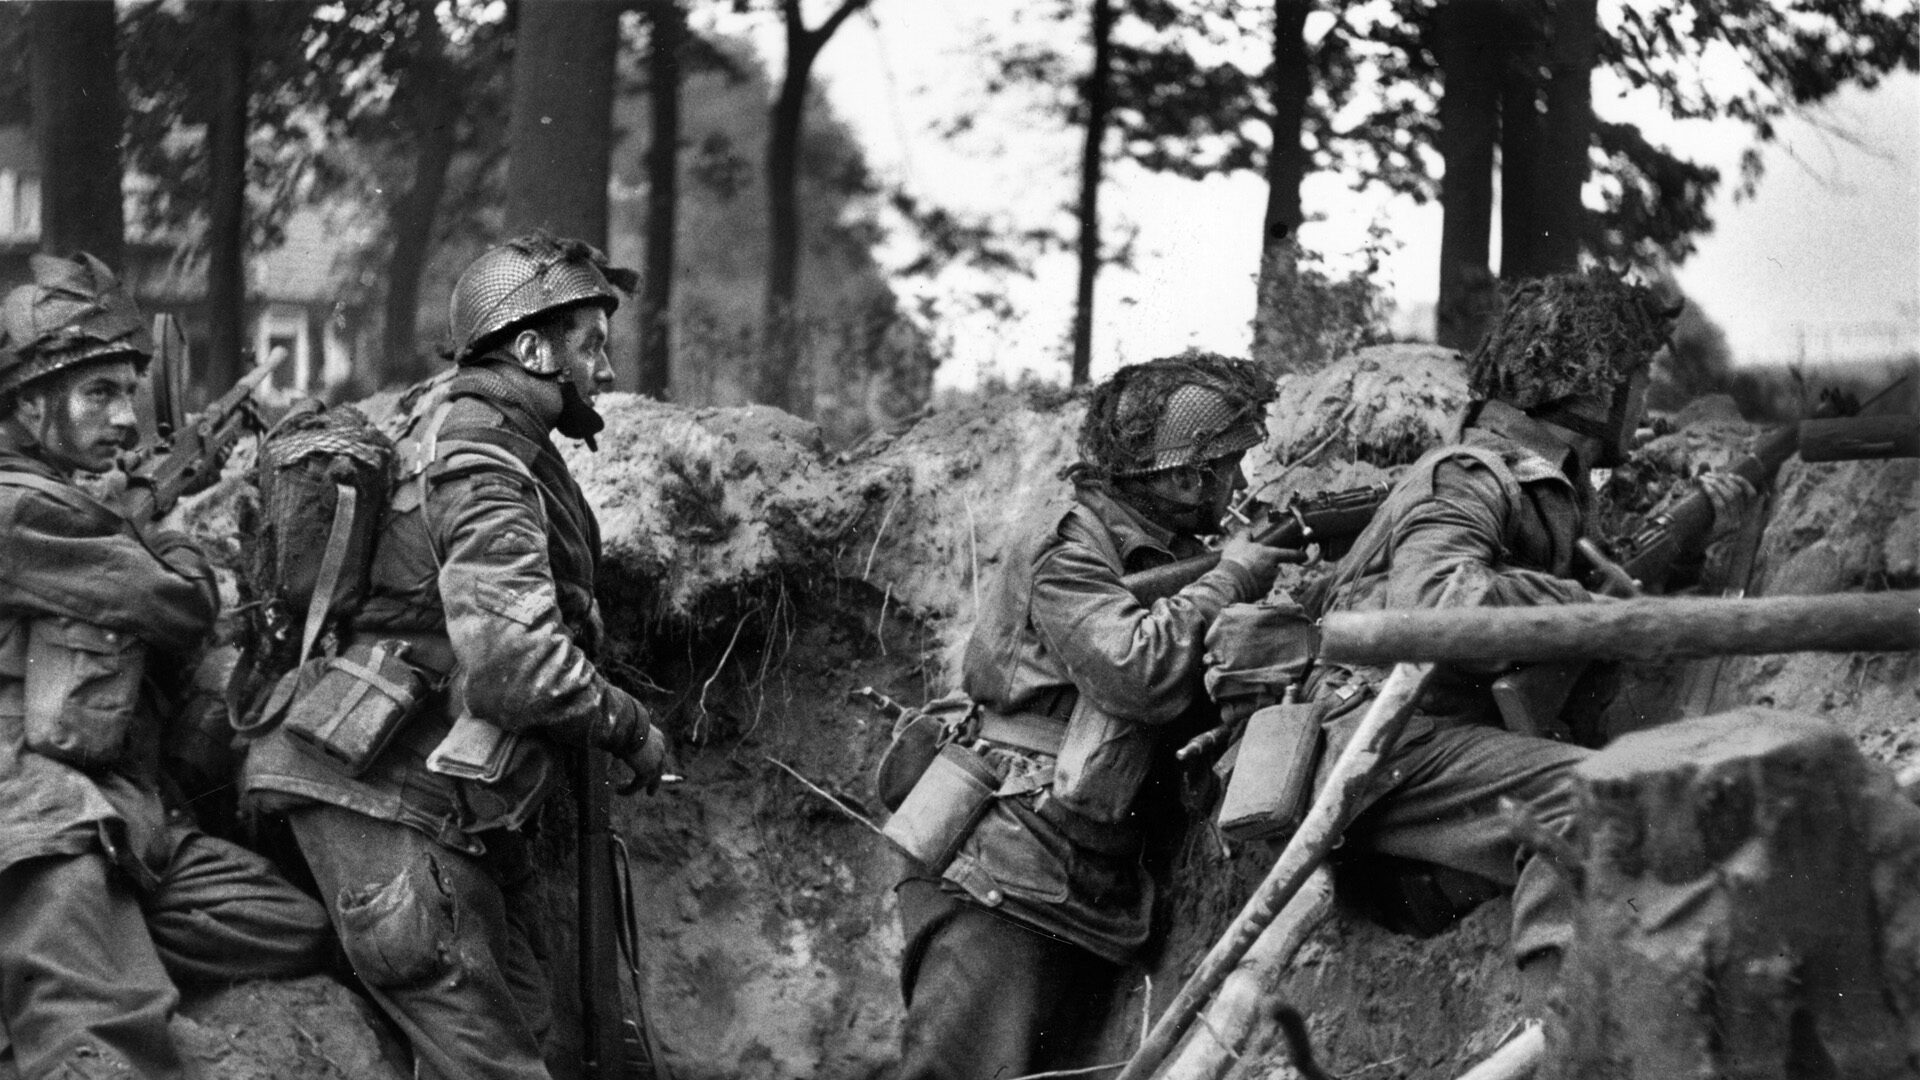 British paratroopers take cover in a shell hole on the first day of the operation. Almost immediately the paratroopers became pinned down and at the mercy of German panzers and artillery.